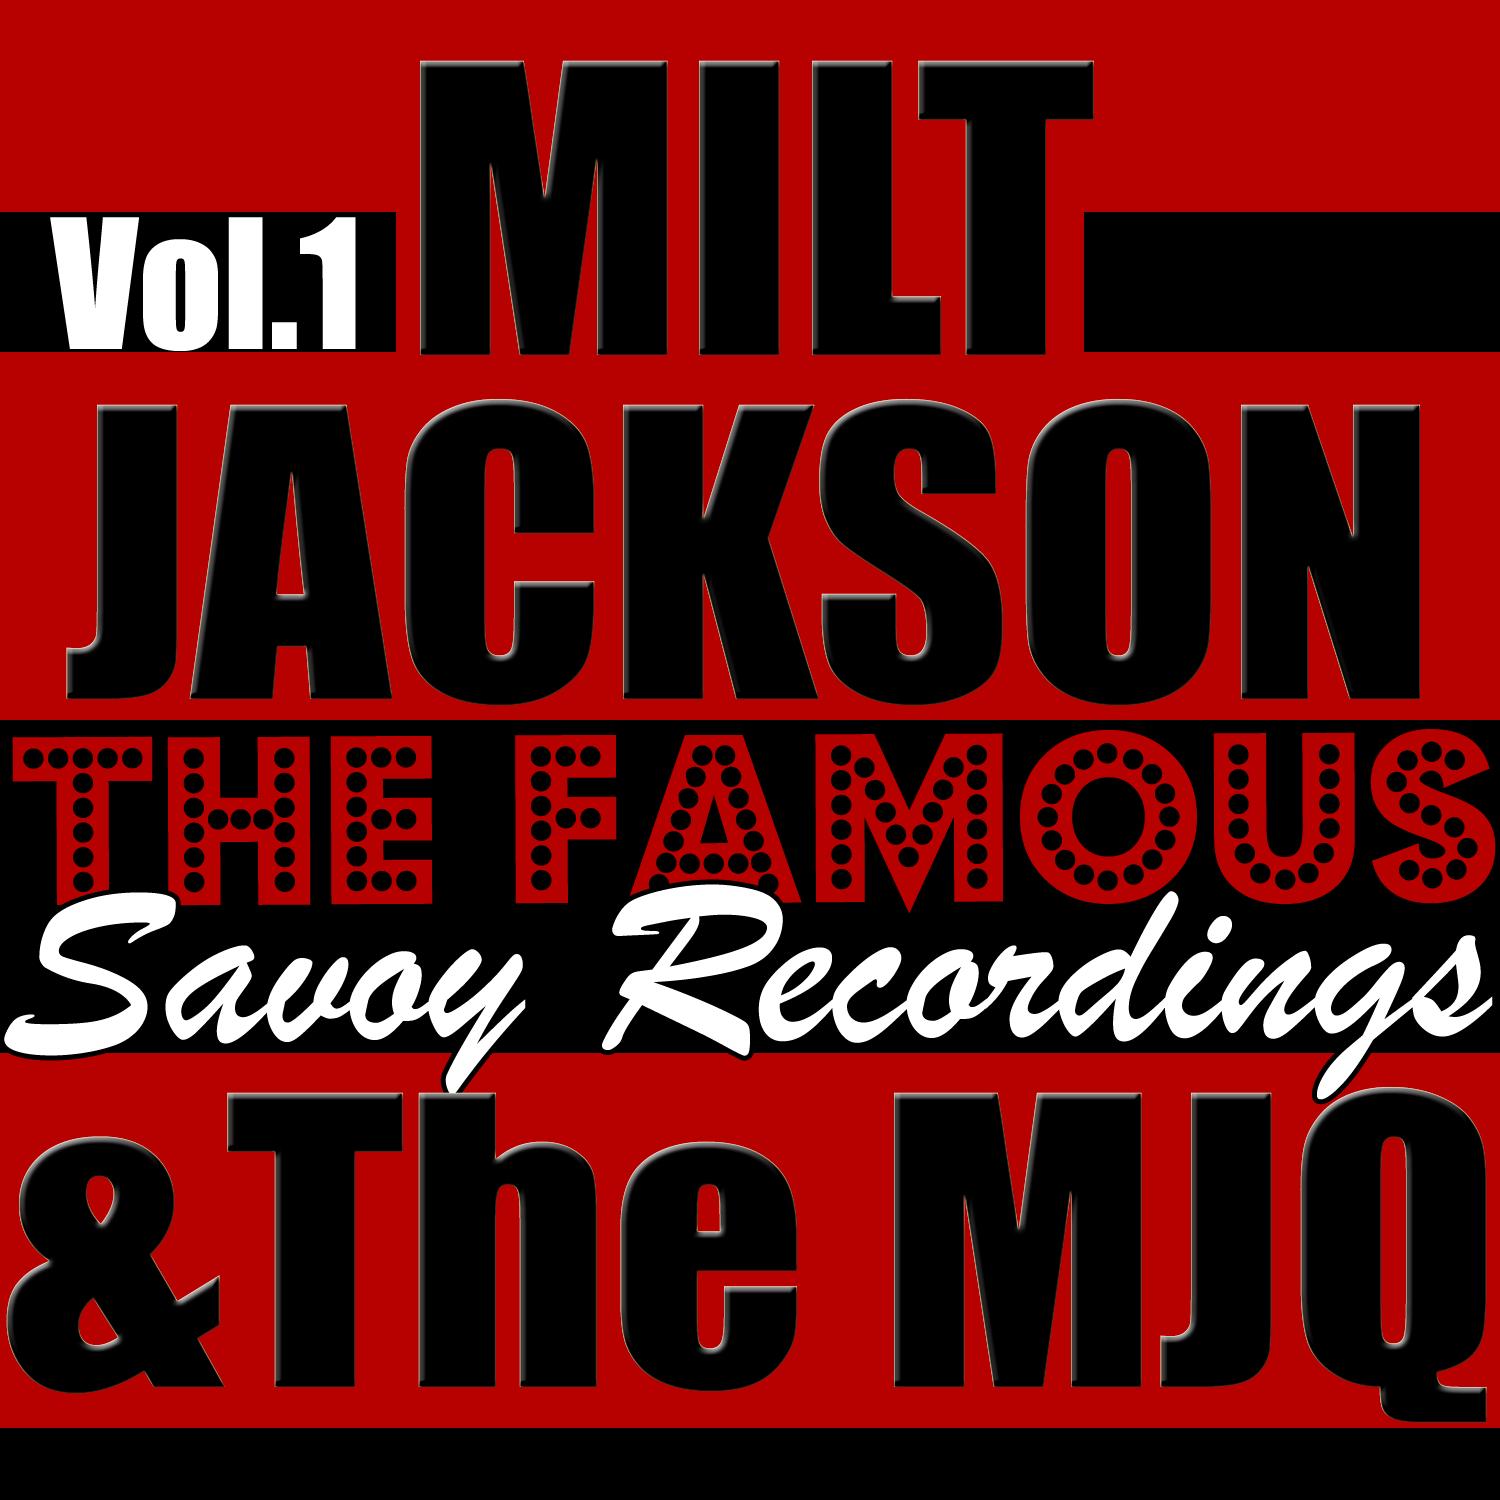 The Famous Savoy Recordings Vol. 1